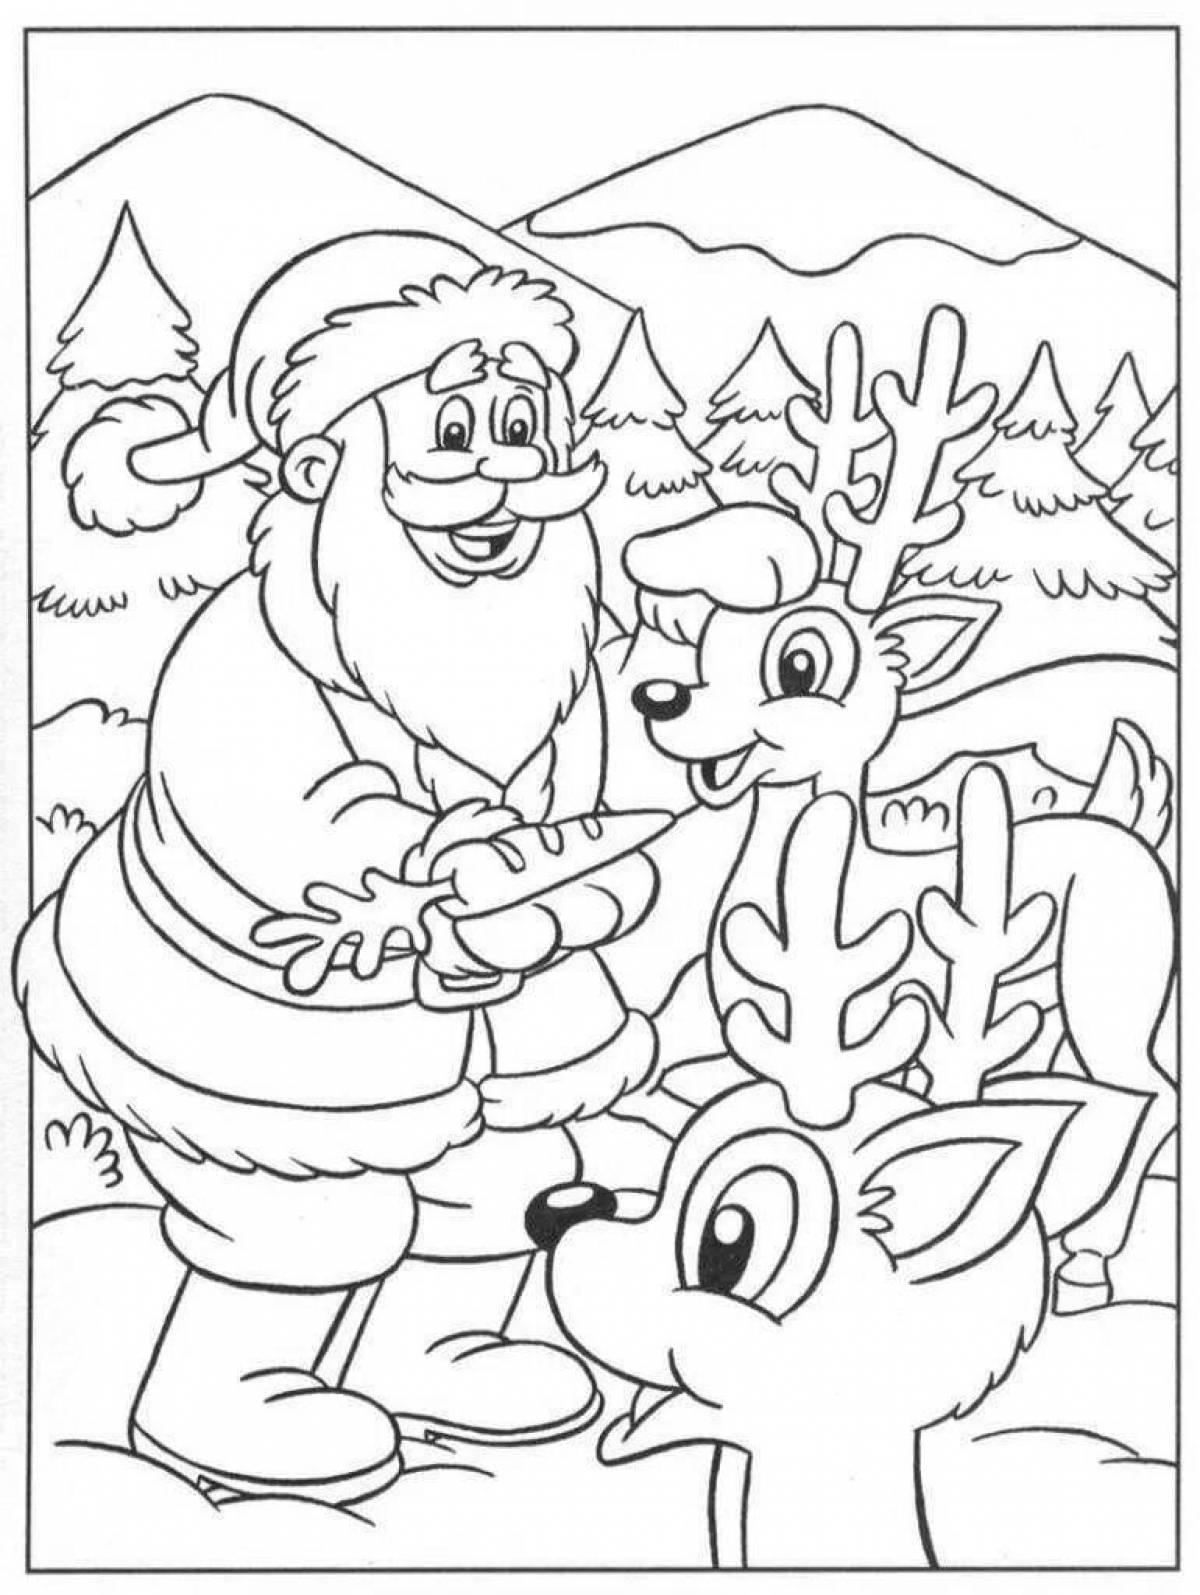 Coloring book animated Santa Claus and animals